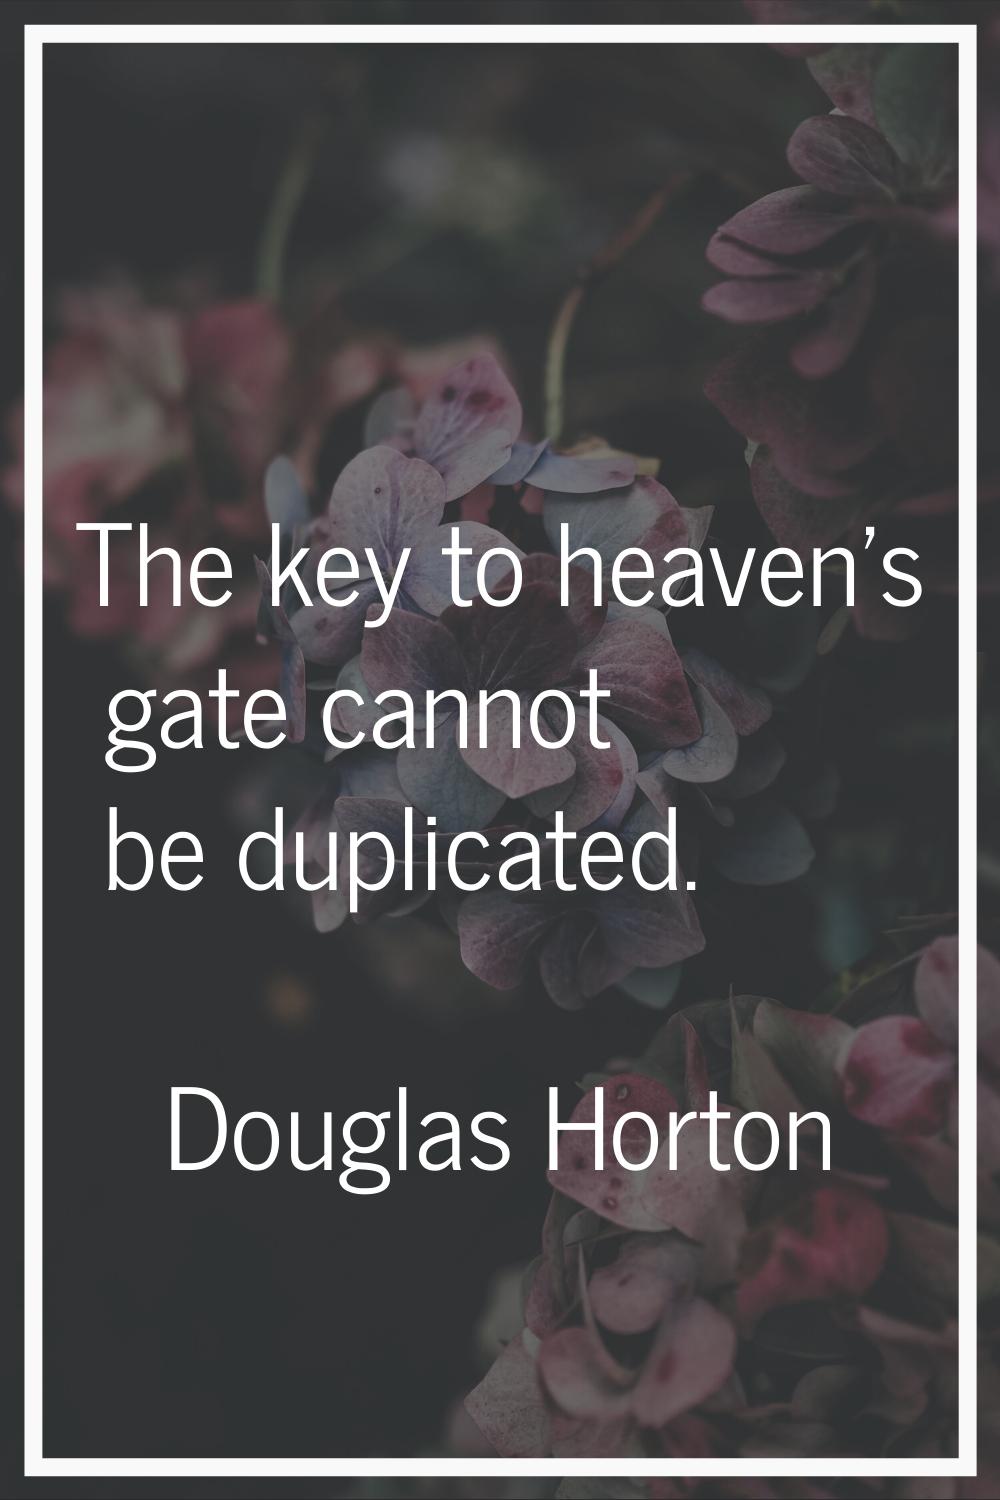 The key to heaven's gate cannot be duplicated.